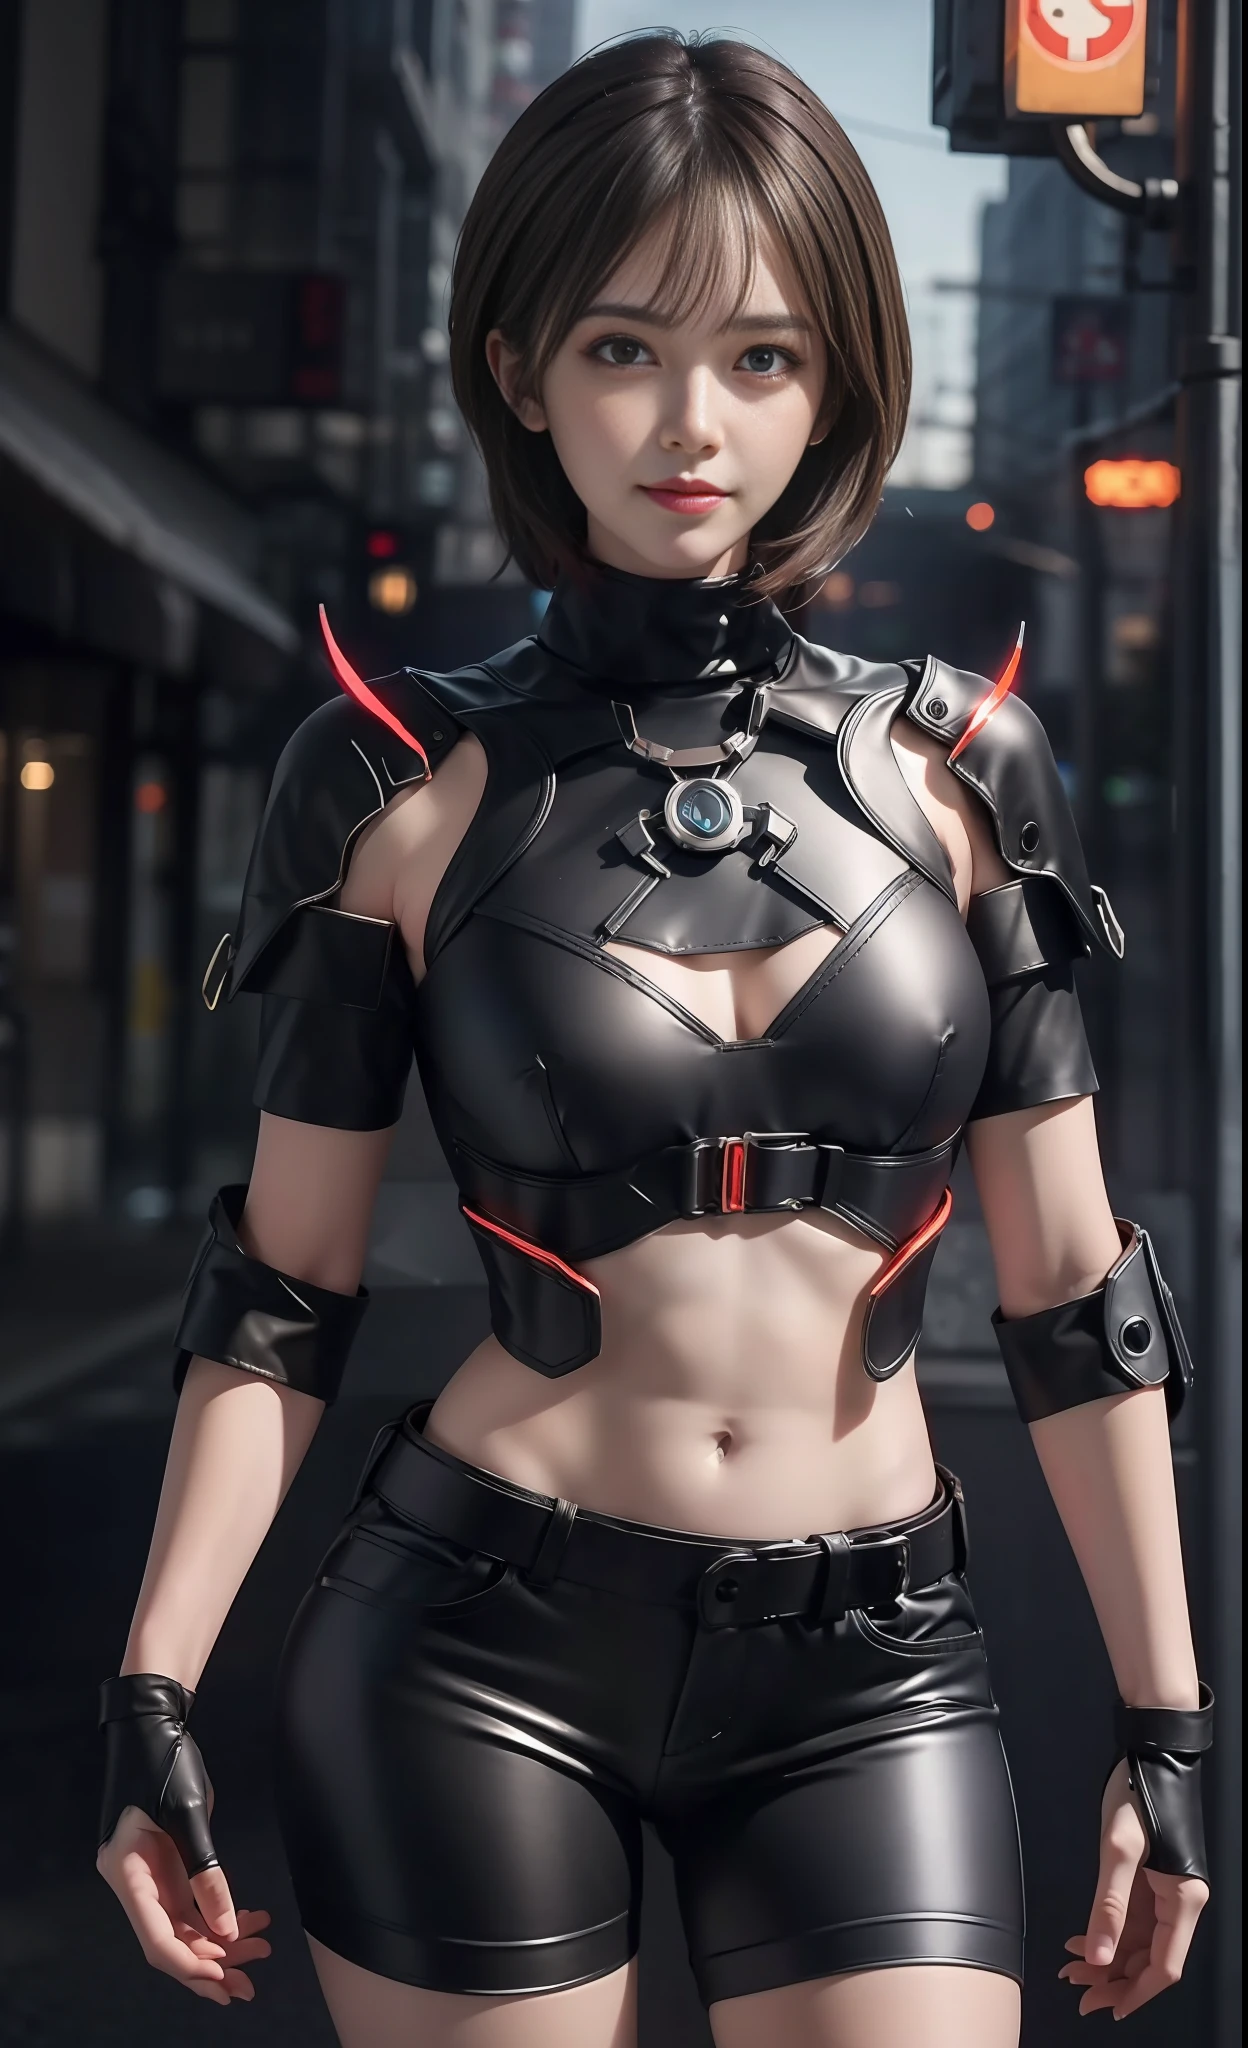 Top quality, delicate face, 20-year-old kpop idol girl, red cyborg body, (medium chest: 1.5), skeleton of metal structure, mechanical joints, bangs, (Pafia Leola), (1.2), cyberpunk, sci-fi, shorts. Neon Street. Headphone. Bodysuit. Glasses. Thick, protruding blood vessels. Big . Blood lines that emerged. Raised lines.